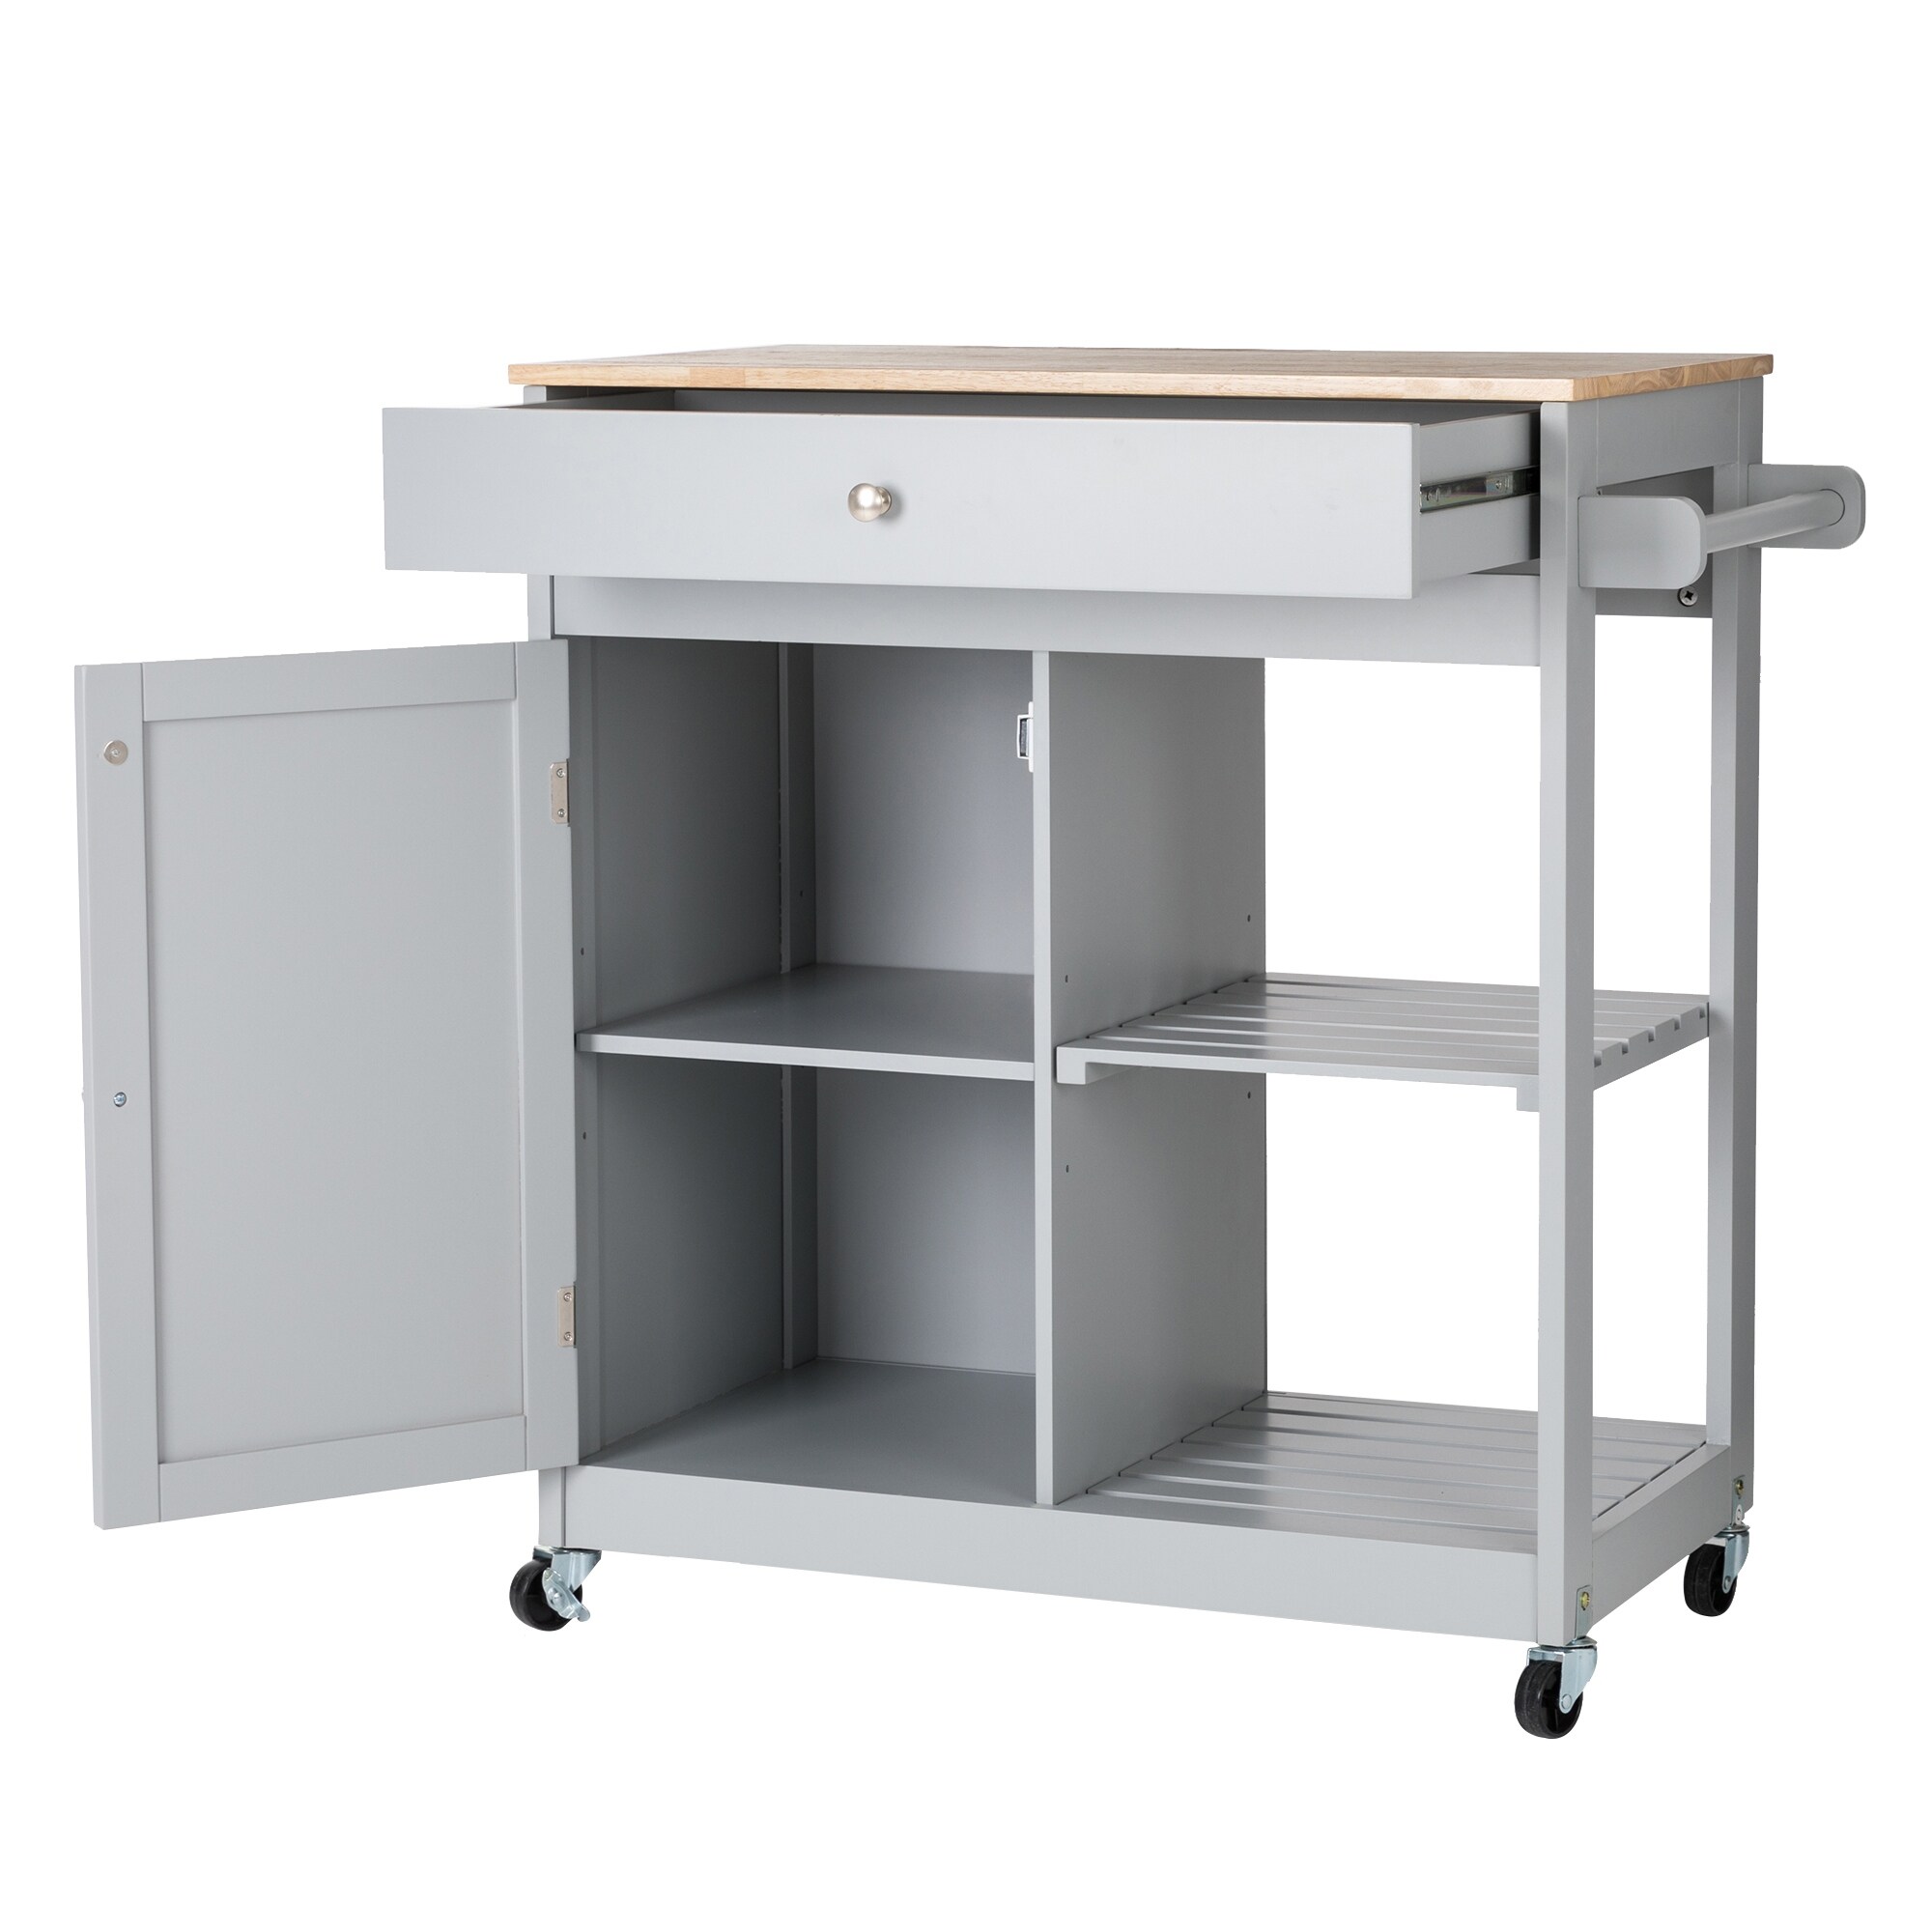 Halifax North America Rolling 35.75 High Kitchen Island Cart on Wheels | Mathis Home